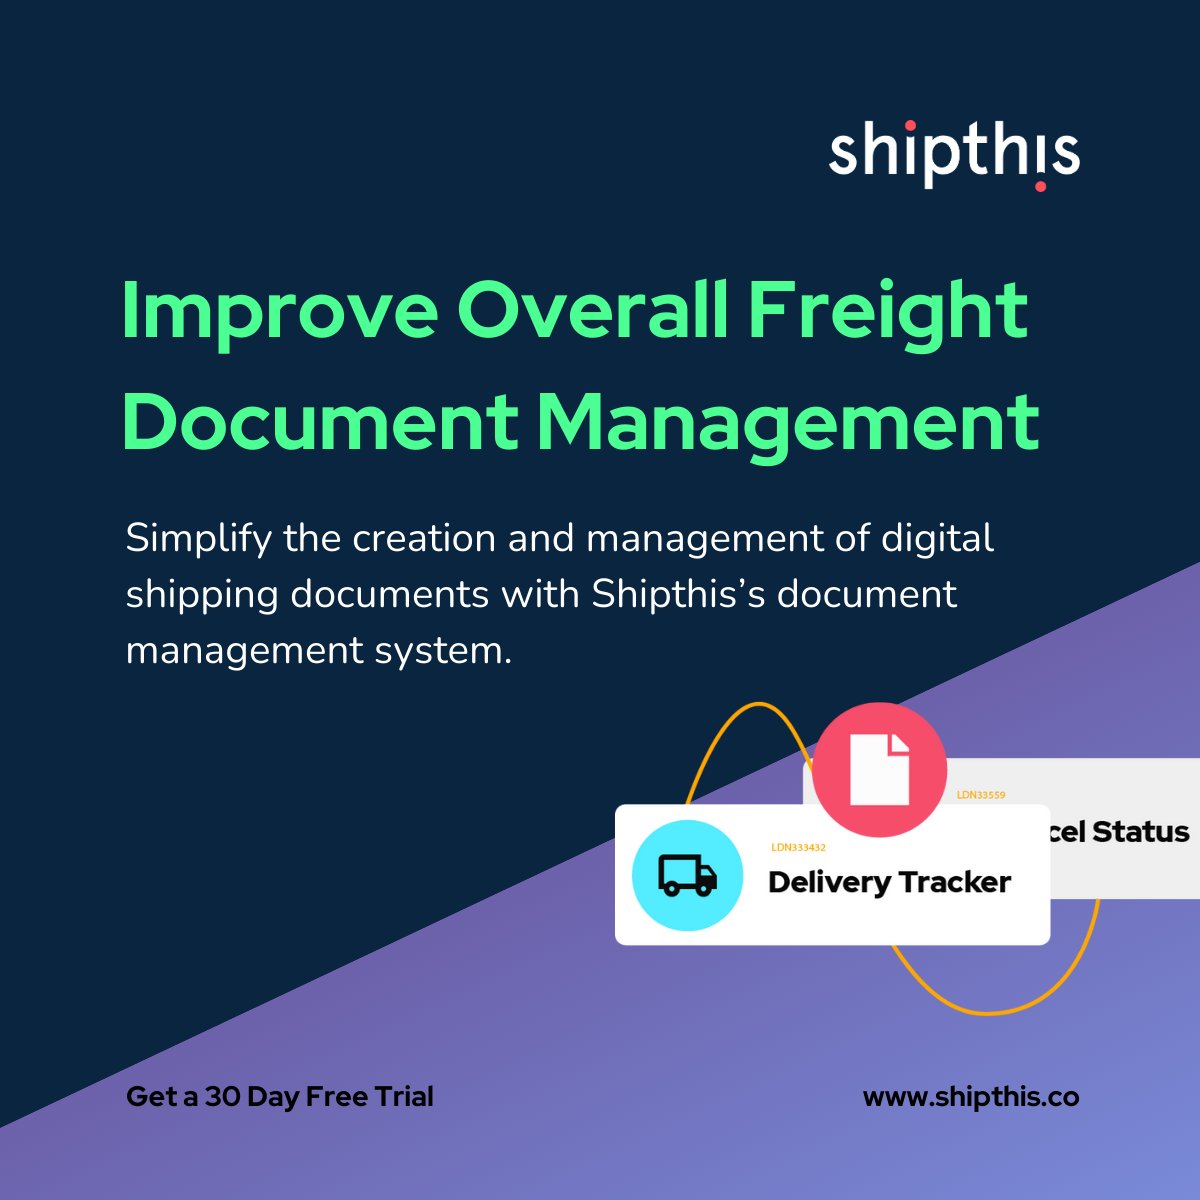 Generate custom, compliant, ready-to-use digital shipping documents within our system for every shipment. Shipthis's smart document feature simplifies and streamlines your documentation process.

#Shipthis #Documentmanagementsystem #smartdocumentation #freightforwarding